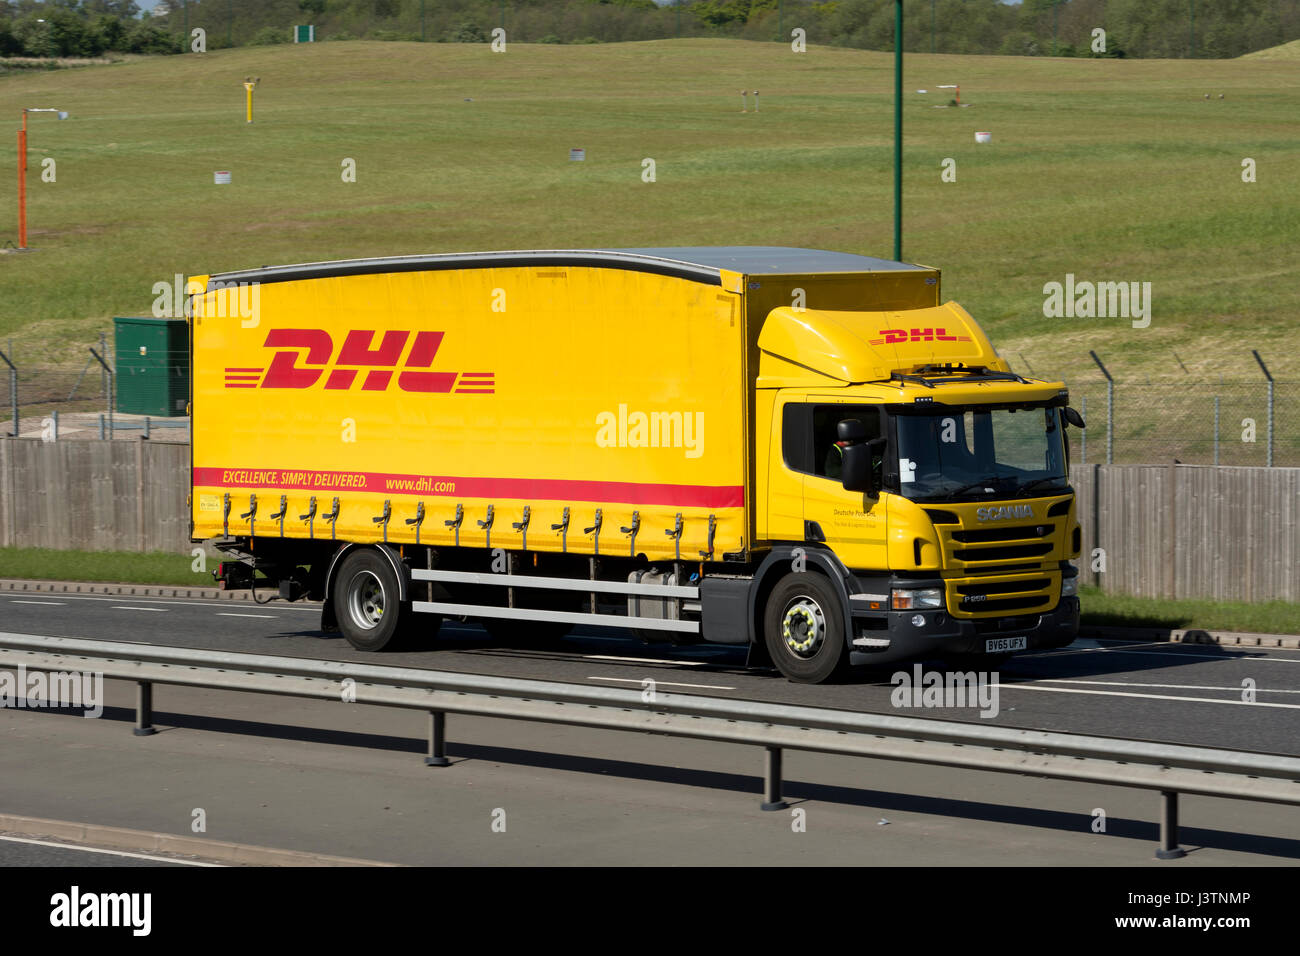 DHL lorry on the A45 road, West Midlands, UK Stock Photo